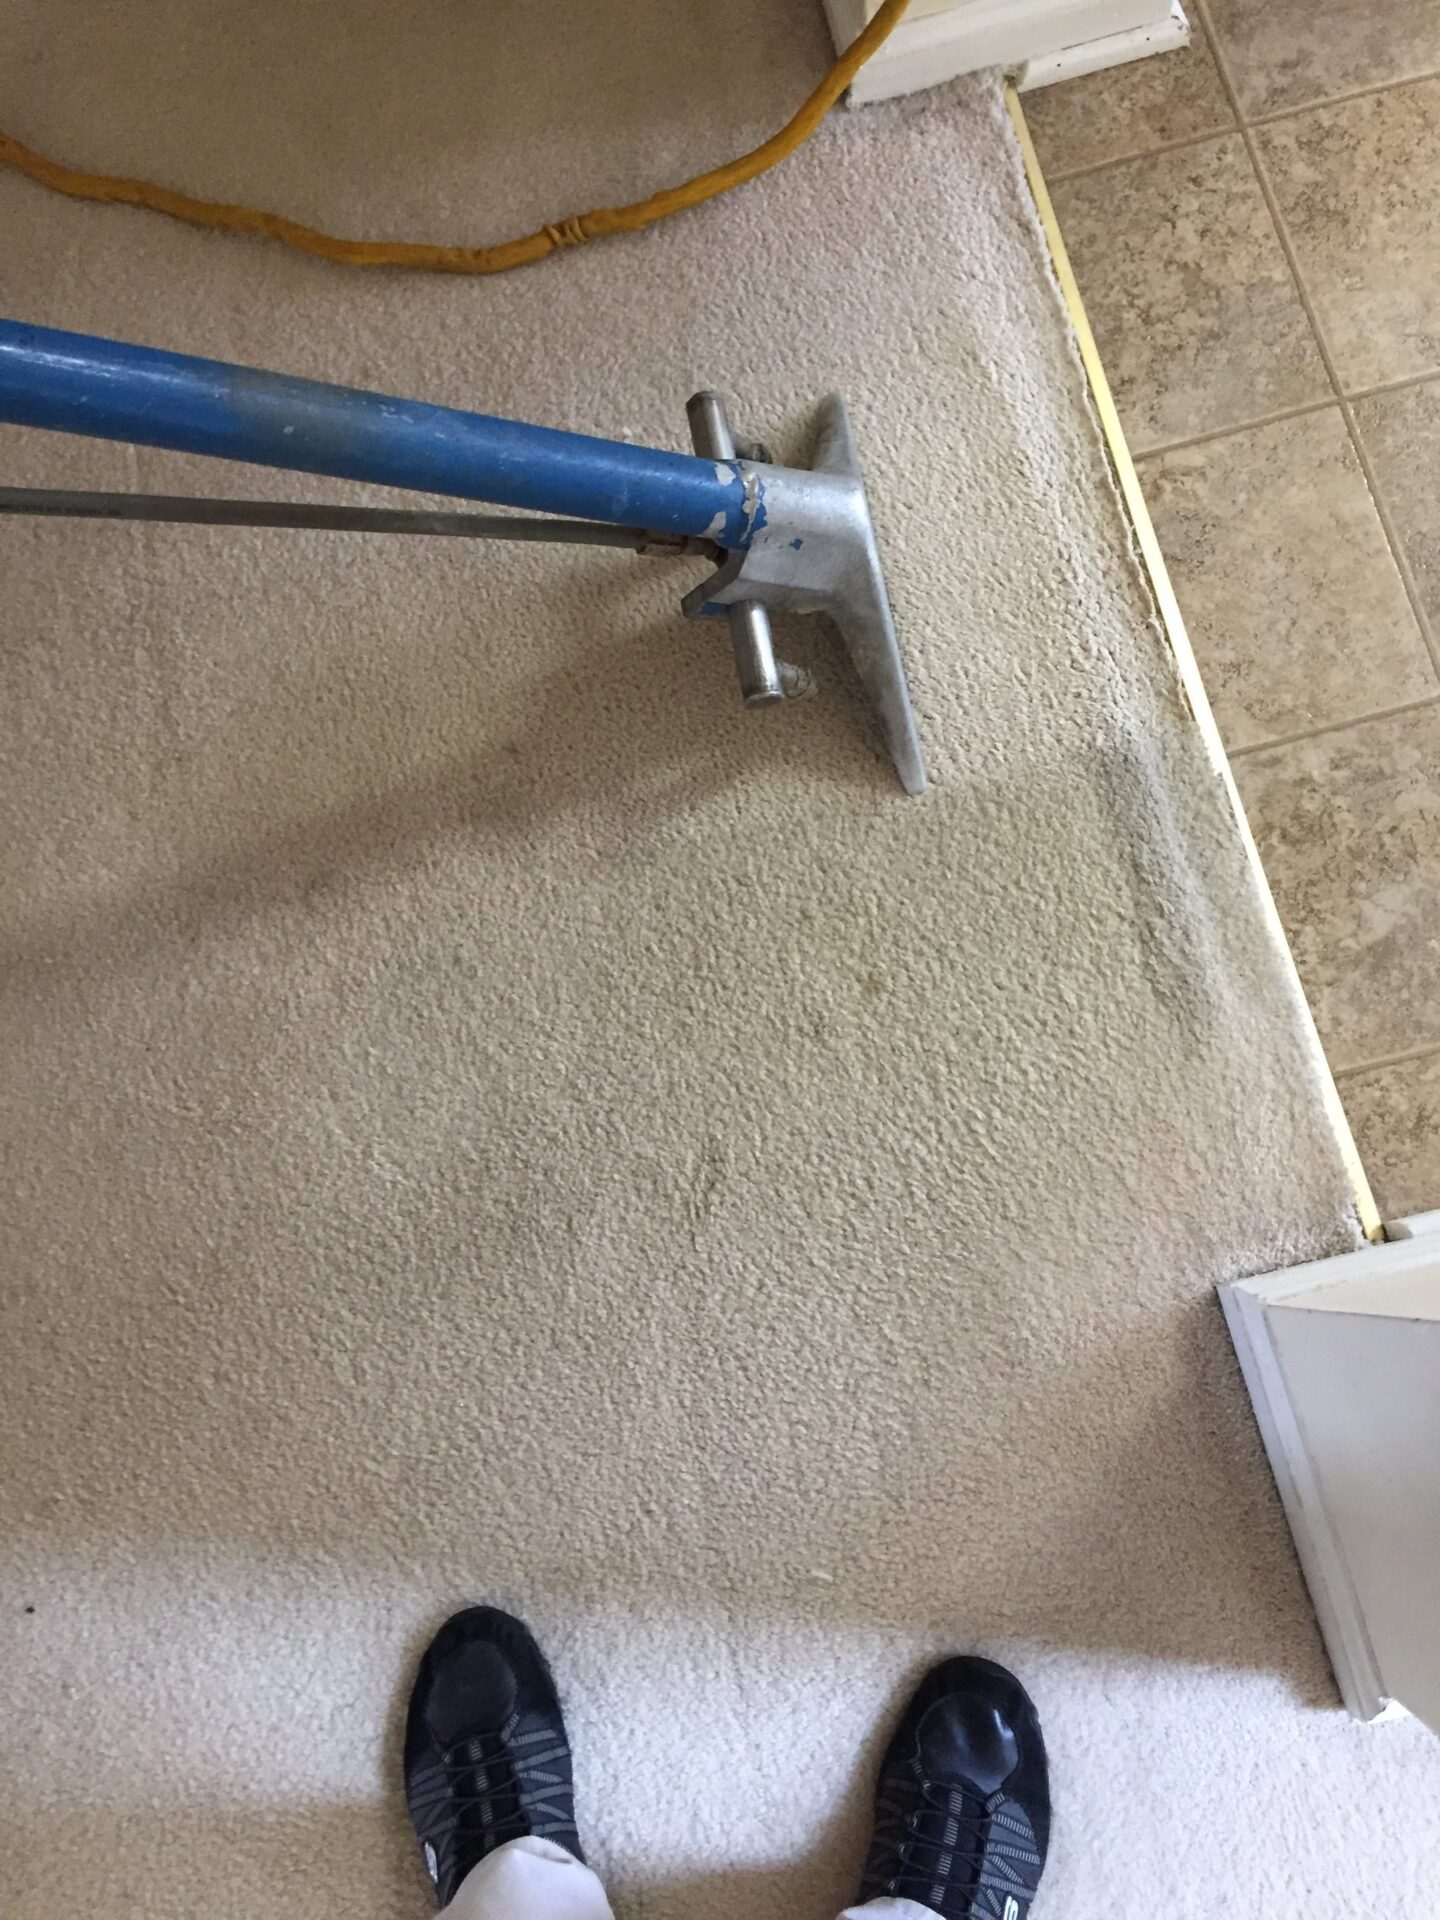 A closeup look at the vacuum cleaner cleaing the floor